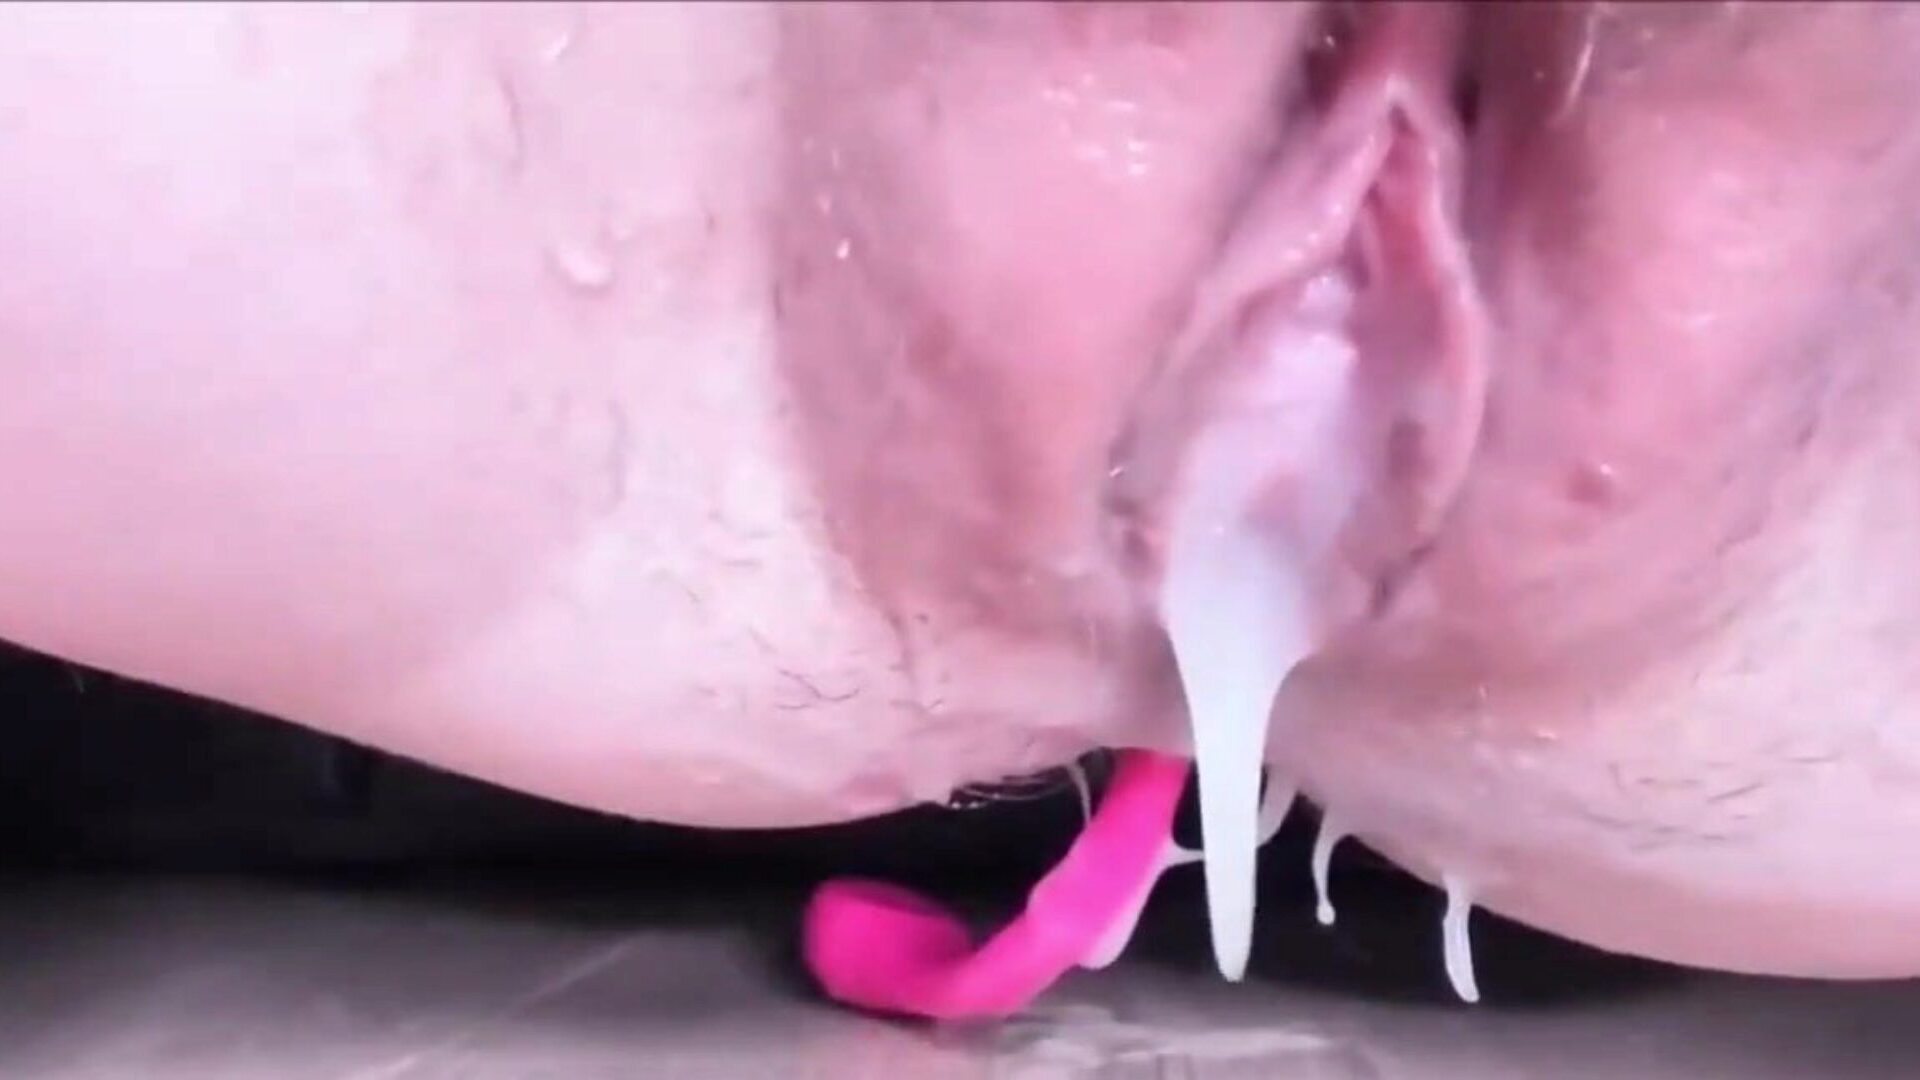 Incredible Open Pussy Closeup Ejaculation Orgasm in HD